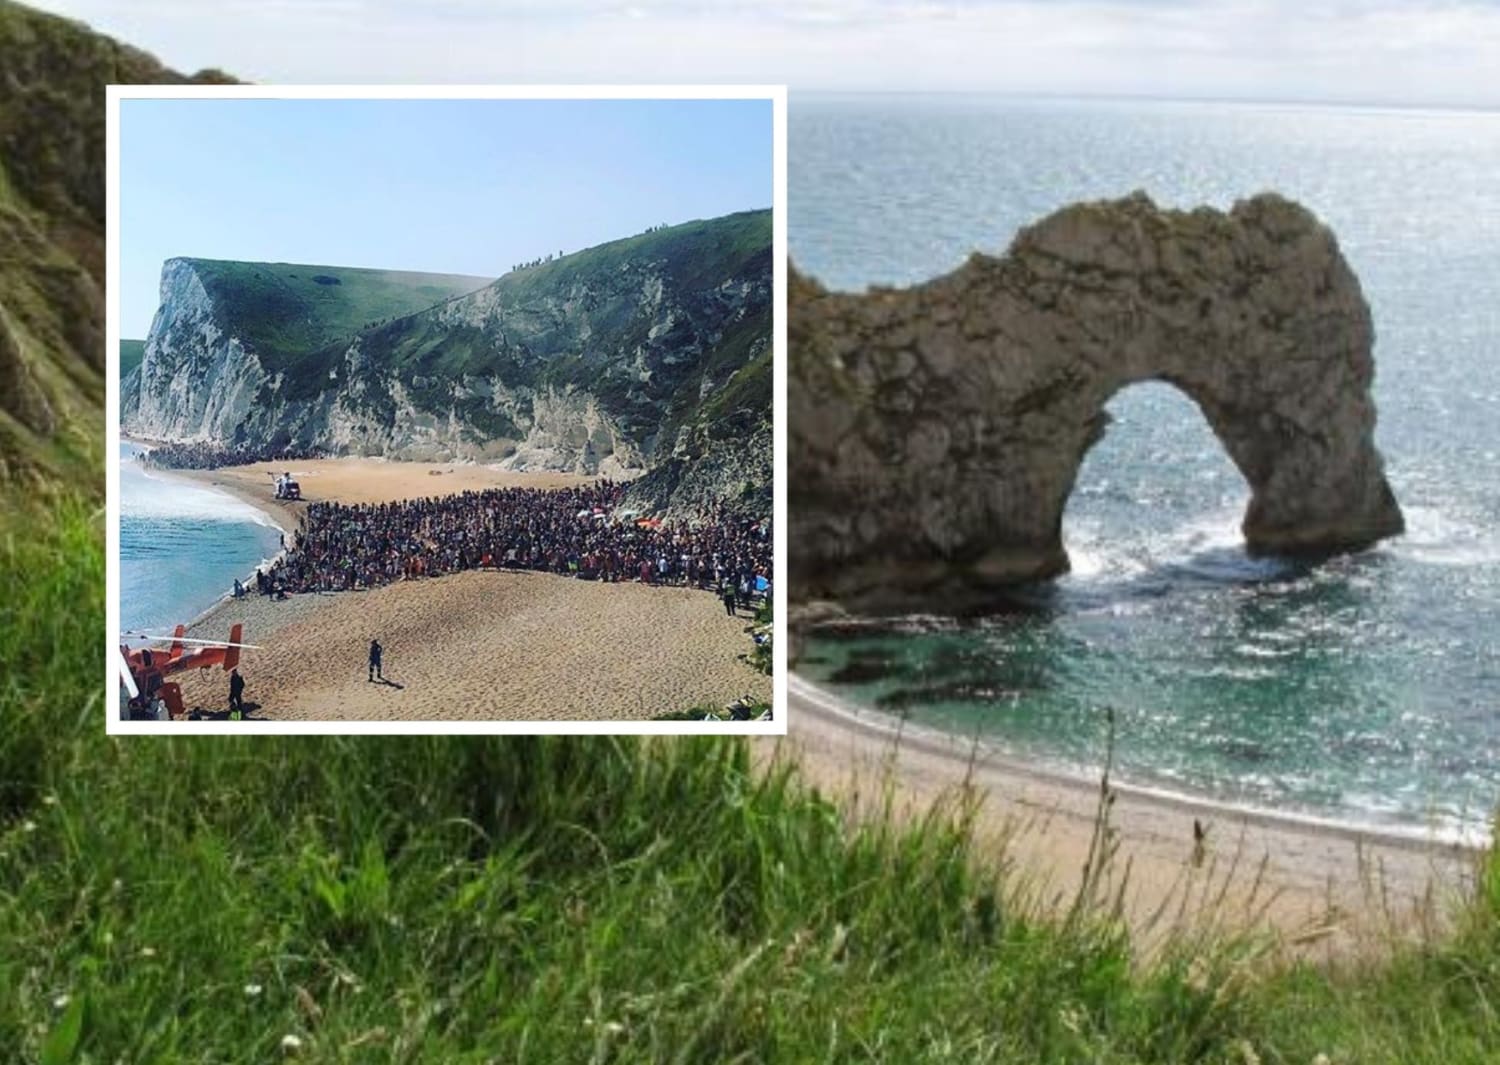 Air ambulances land at Durdle Door to treat people seriously injured jumping off arch